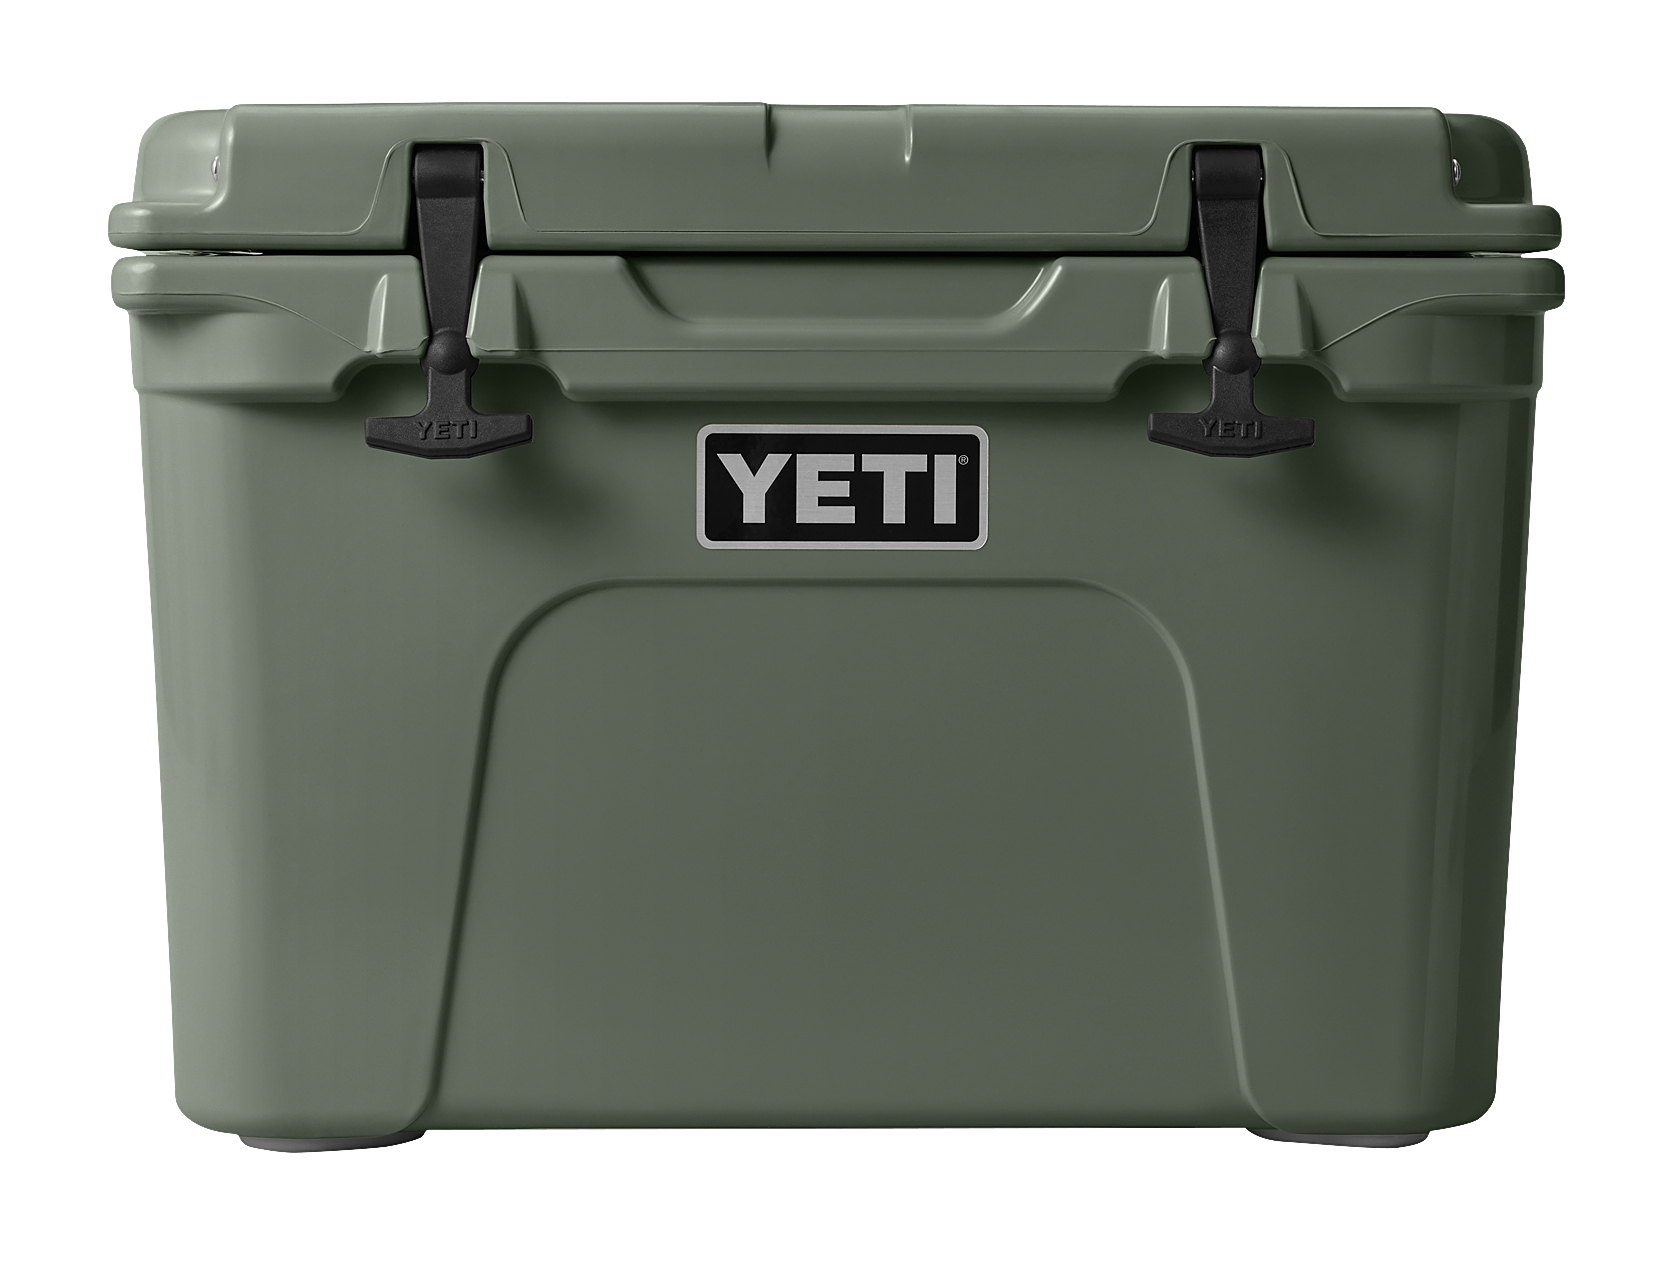 Bass Pro Shops - Keeping it cold or keeping it hot. Yeti is on sale,  believe it or not!